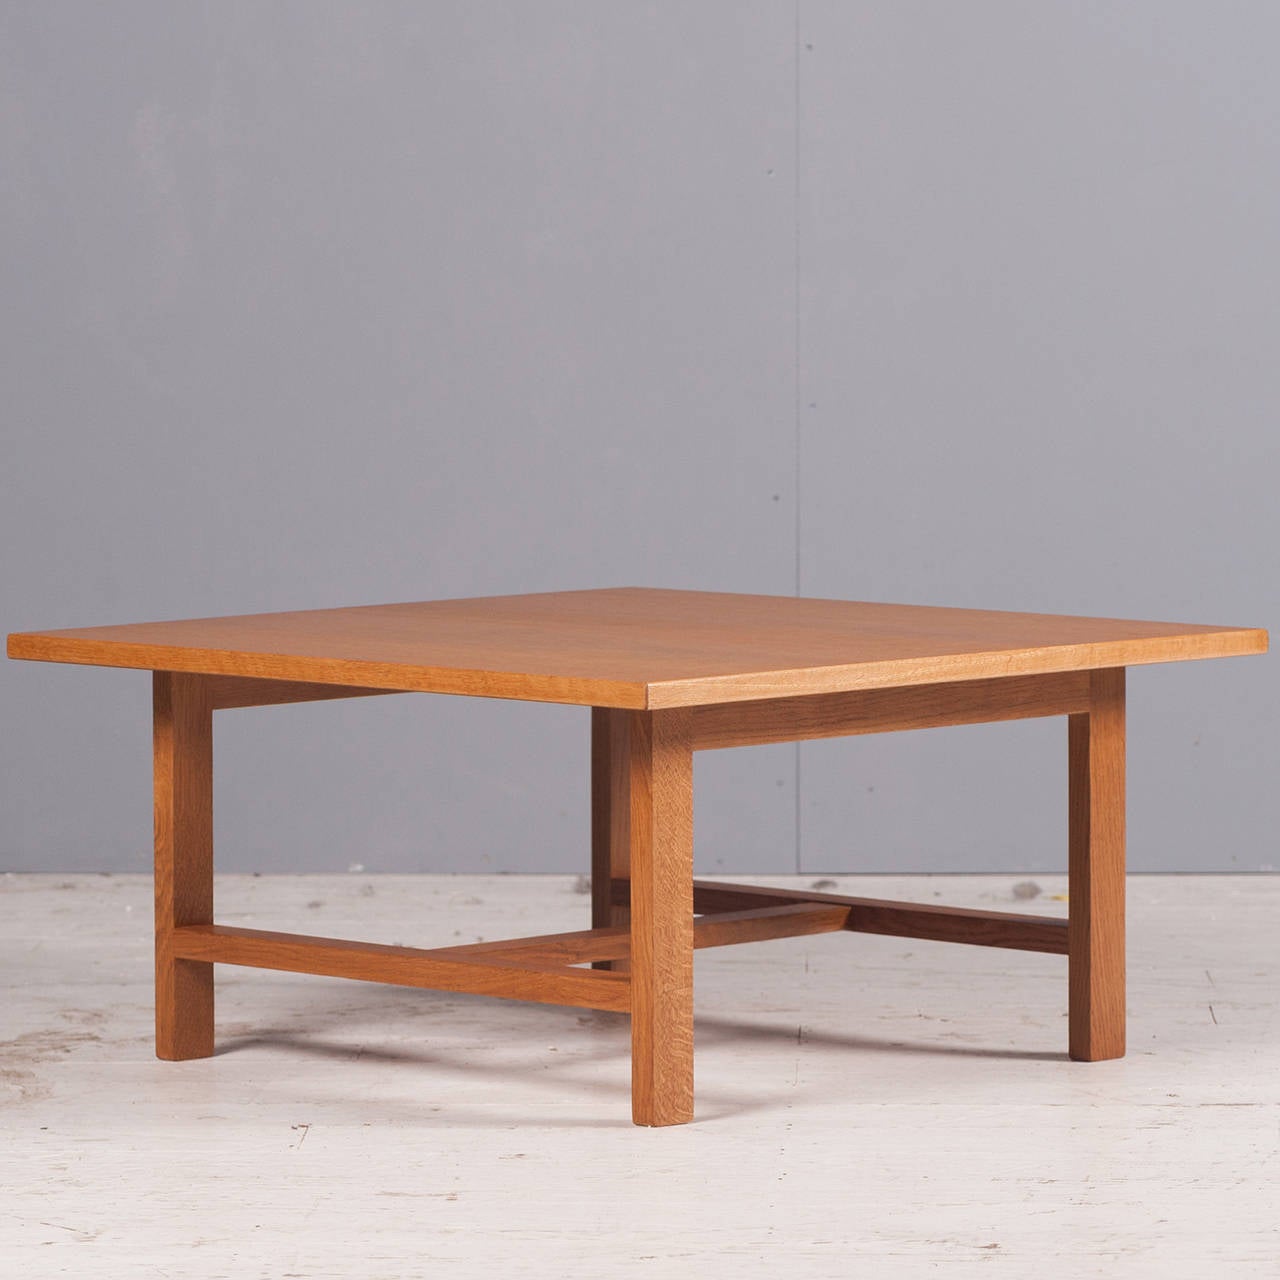 A lovely, simple square coffee table in Oak by famed Danish designer, Hans J. Wegner. A classic yet still totally modern, this piece is perfect for smaller living spaces and has a light presence, beautiful grain and solid frame.